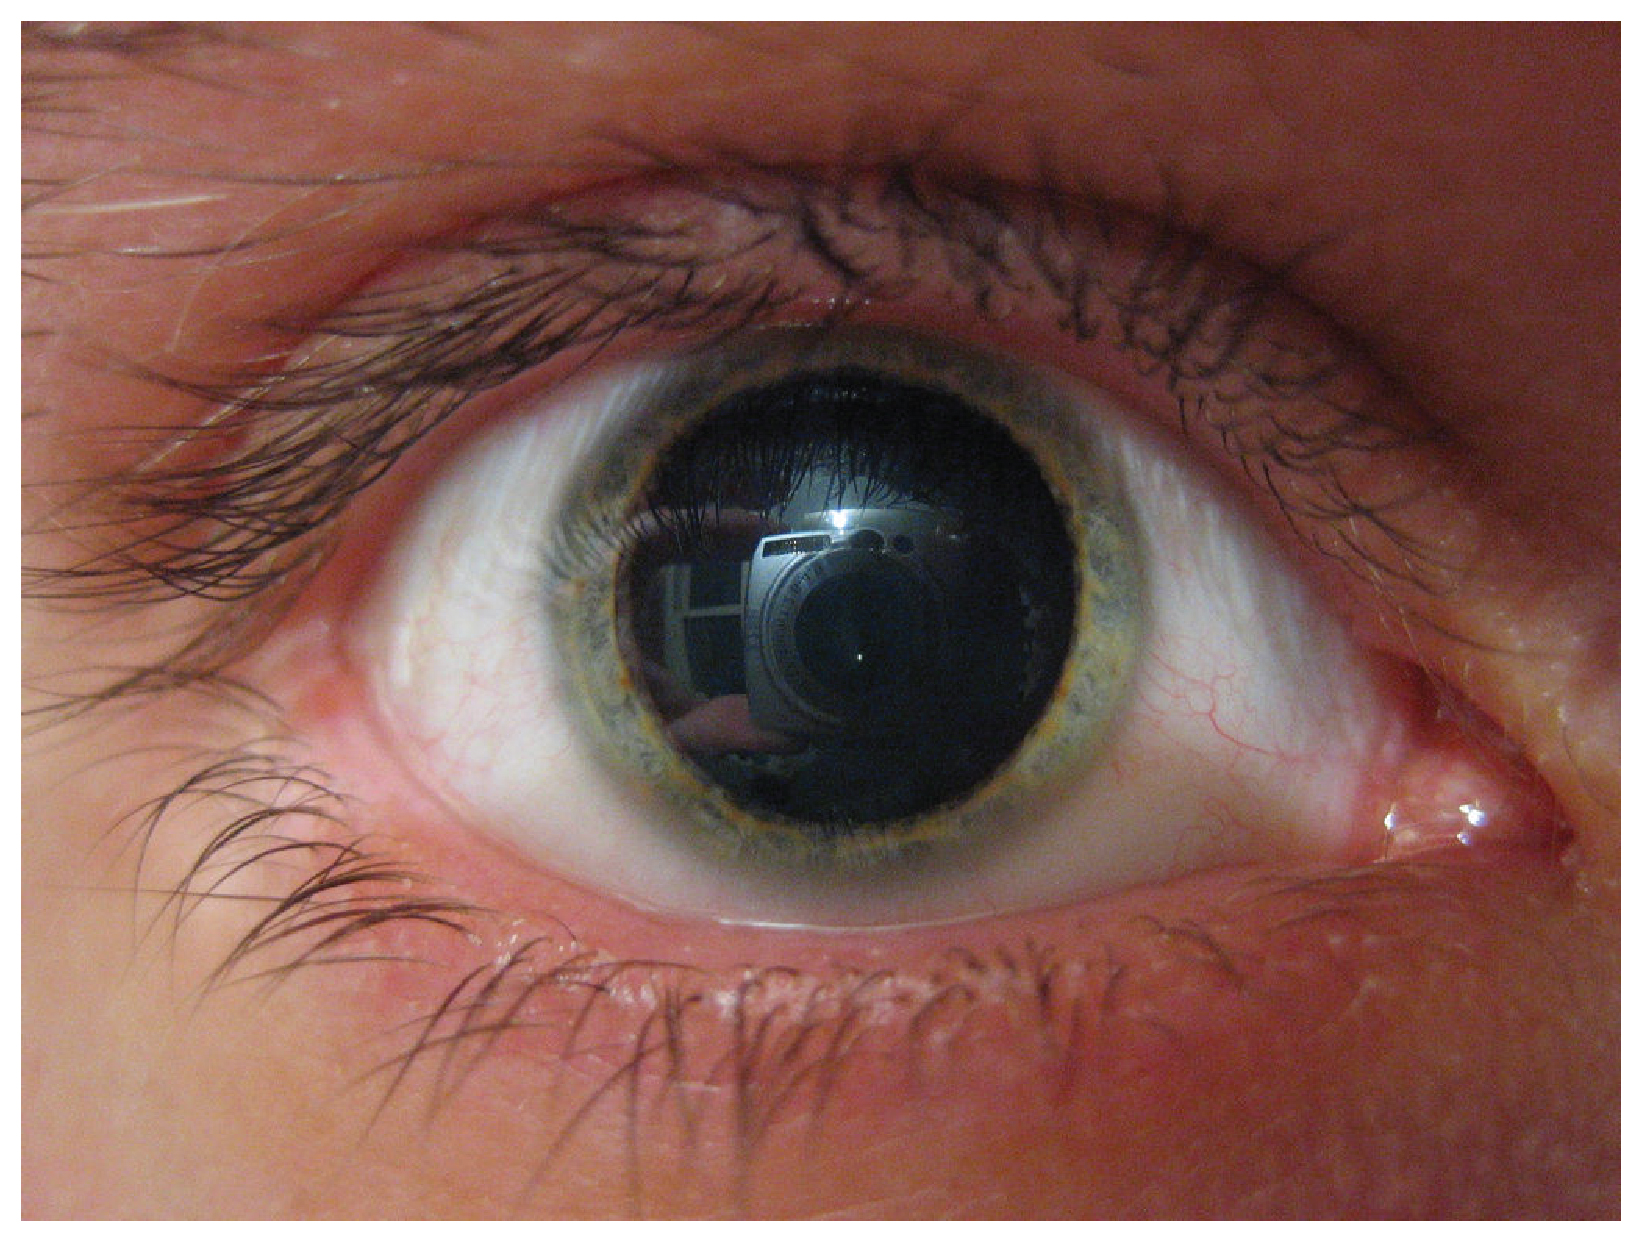 This photograph shows a person’s eye with a relatively large pupil.